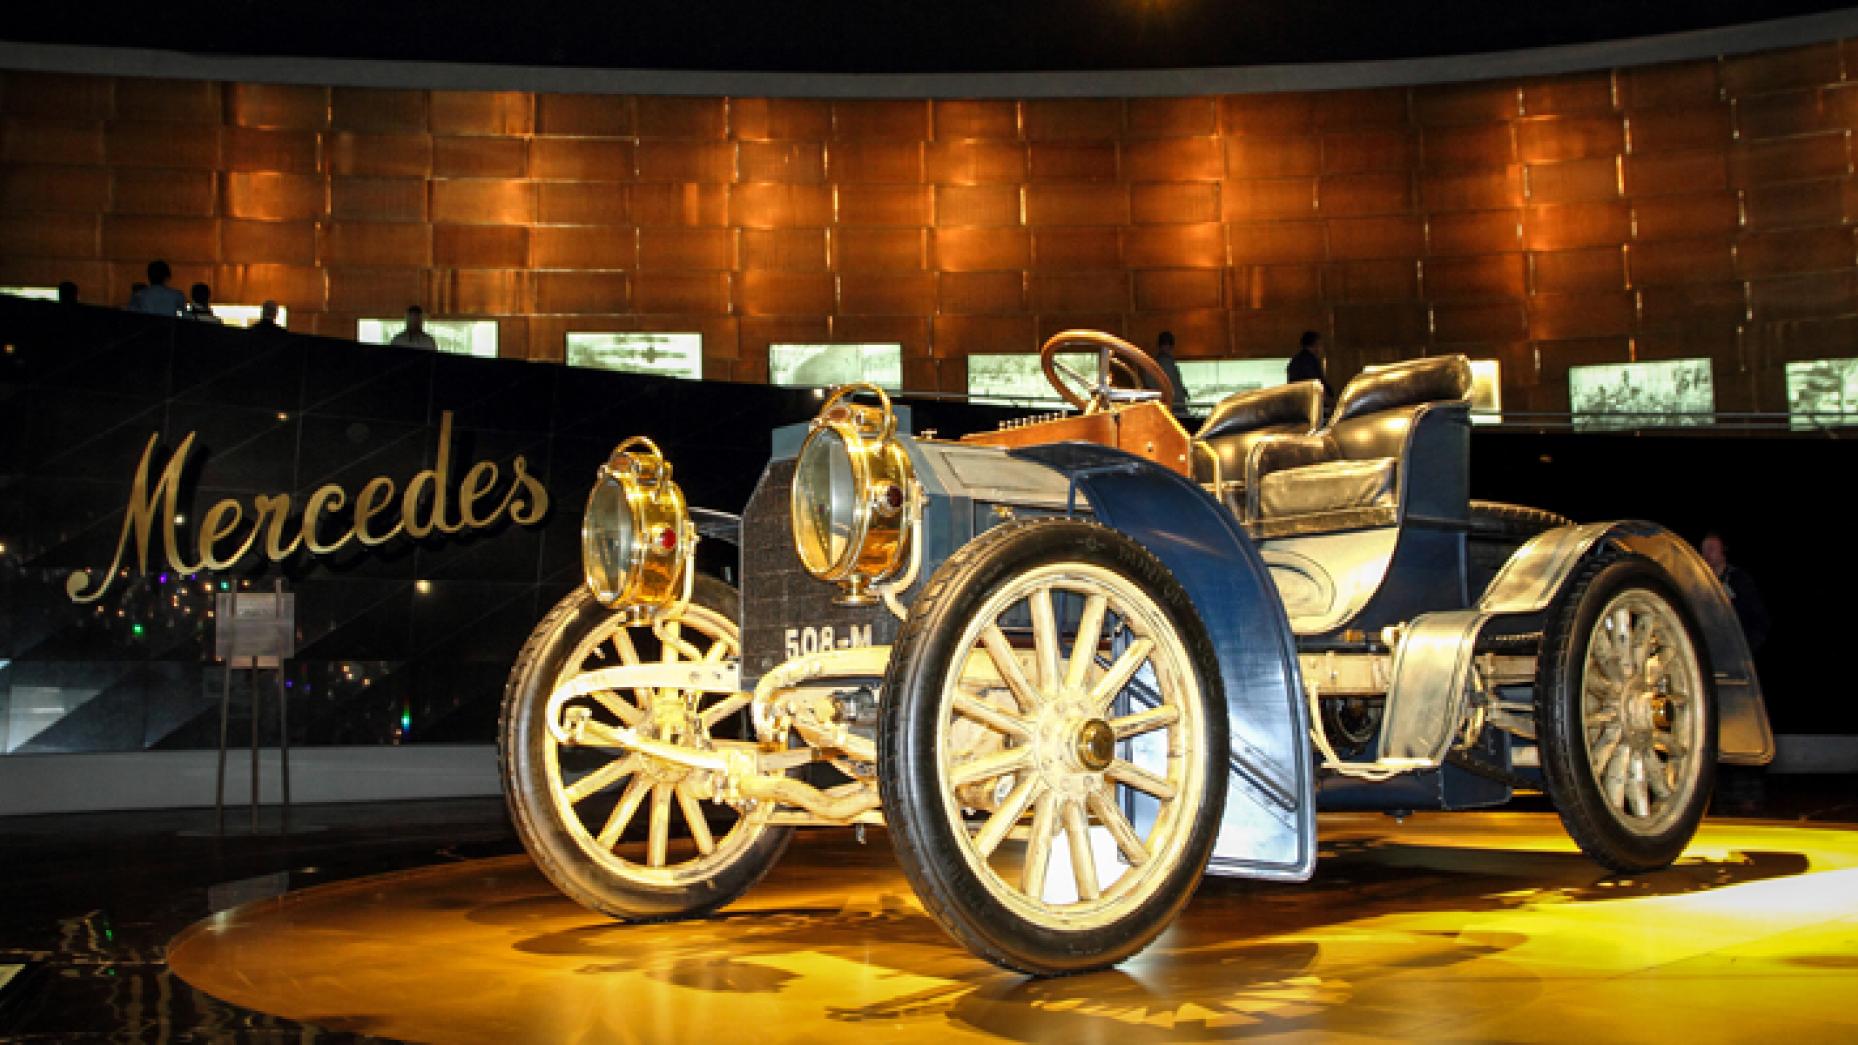 1902 MERCEDES SIMPLEX: The successor to the all-conquering Mercedes 35bhp, this four-wheeled Mercedes rocketed on to 80kph, and was so named because of the ‘simple’ ease with which it handled. Attention Assist? Forget it. More like Pedestrian Assist.